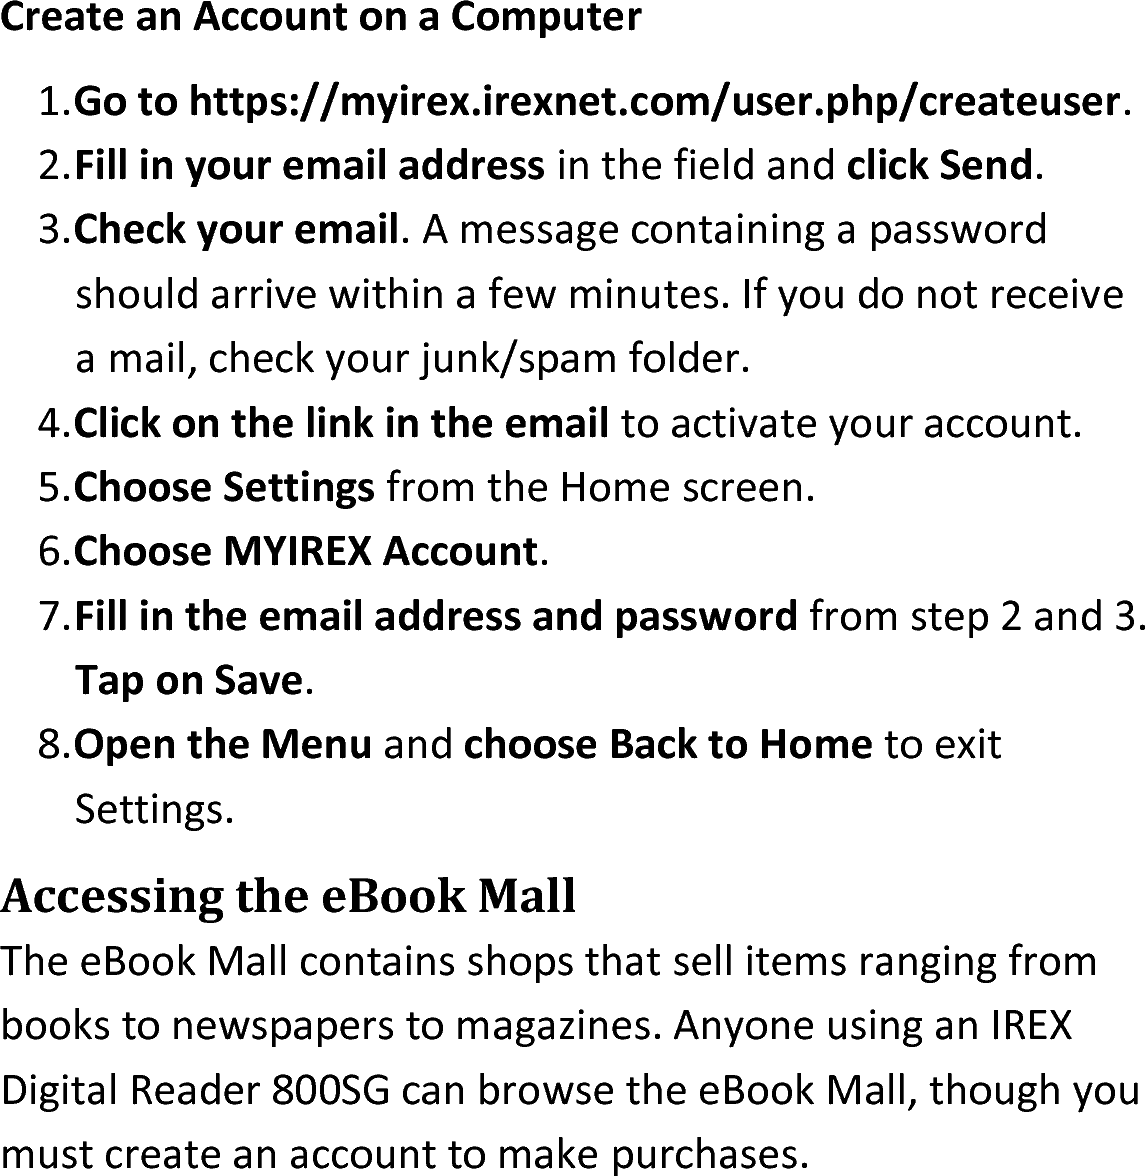 Create an Account on a Computer1.Go to https://myirex.irexnet.com/user.php/createuser. 2.Fill in your email address in the field and click Send.3.Check your email. A message containing a password should arrive within a few minutes. If you do not receive a mail, check your junk/spam folder.4.Click on the link in the email to activate your account.5.Choose Settings from the Home screen.6.Choose MYIREX Account.7.Fill in the email address and password from step 2 and 3. Tap on Save.8.Open the Menu and choose Back to Home to exit Settings.Accessing the eBook MallThe eBook Mall contains shops that sell items ranging from books to newspapers to magazines. Anyone using an IREX Digital Reader 800SG can browse the eBook Mall, though you must create an account to make purchases. 